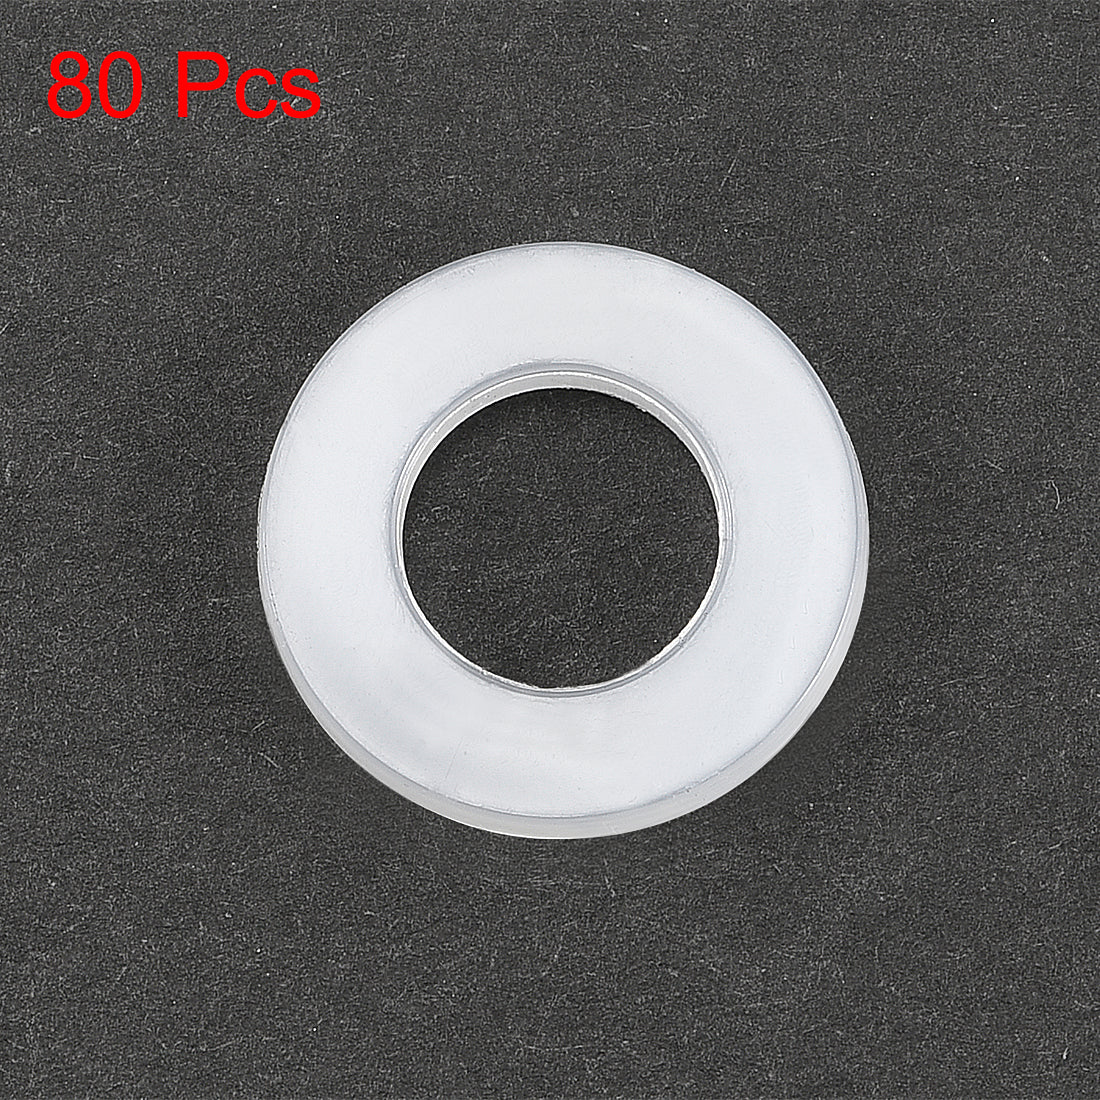 uxcell Uxcell Insulating Washer, 80Pcs 8mm x 16mm x 1.5mm White Vulcanized Fiber Washer, Insulation Gasket for Motherboard